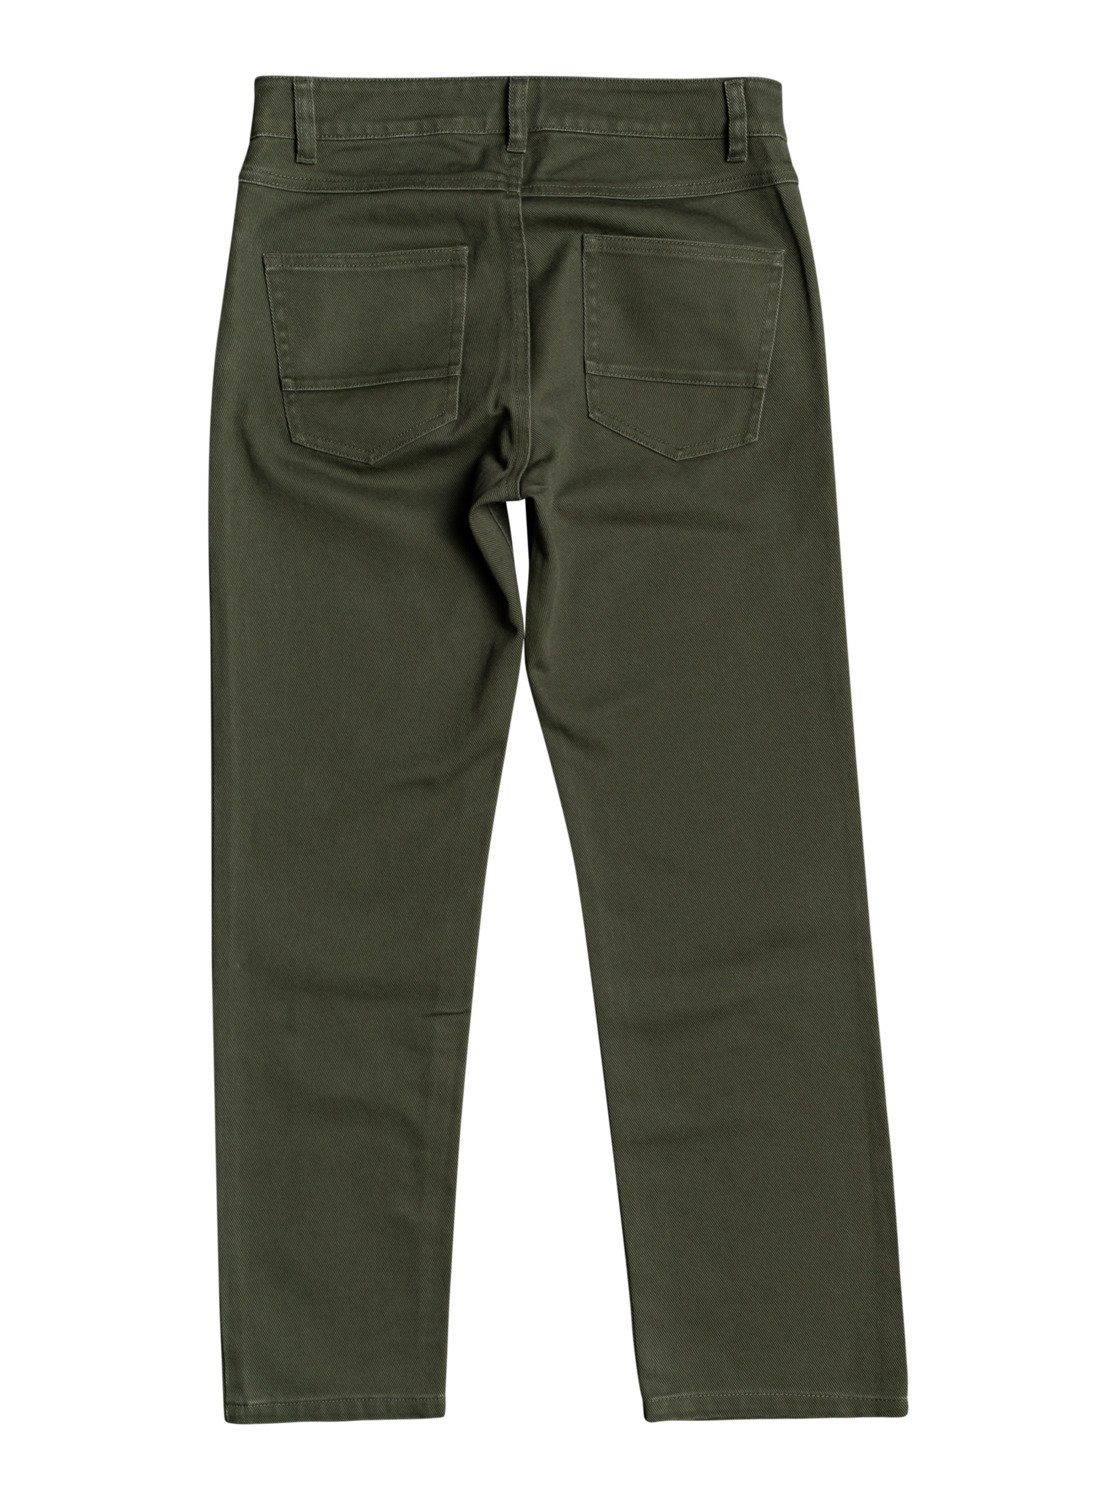 Firefly Stoffhose Quiksilver